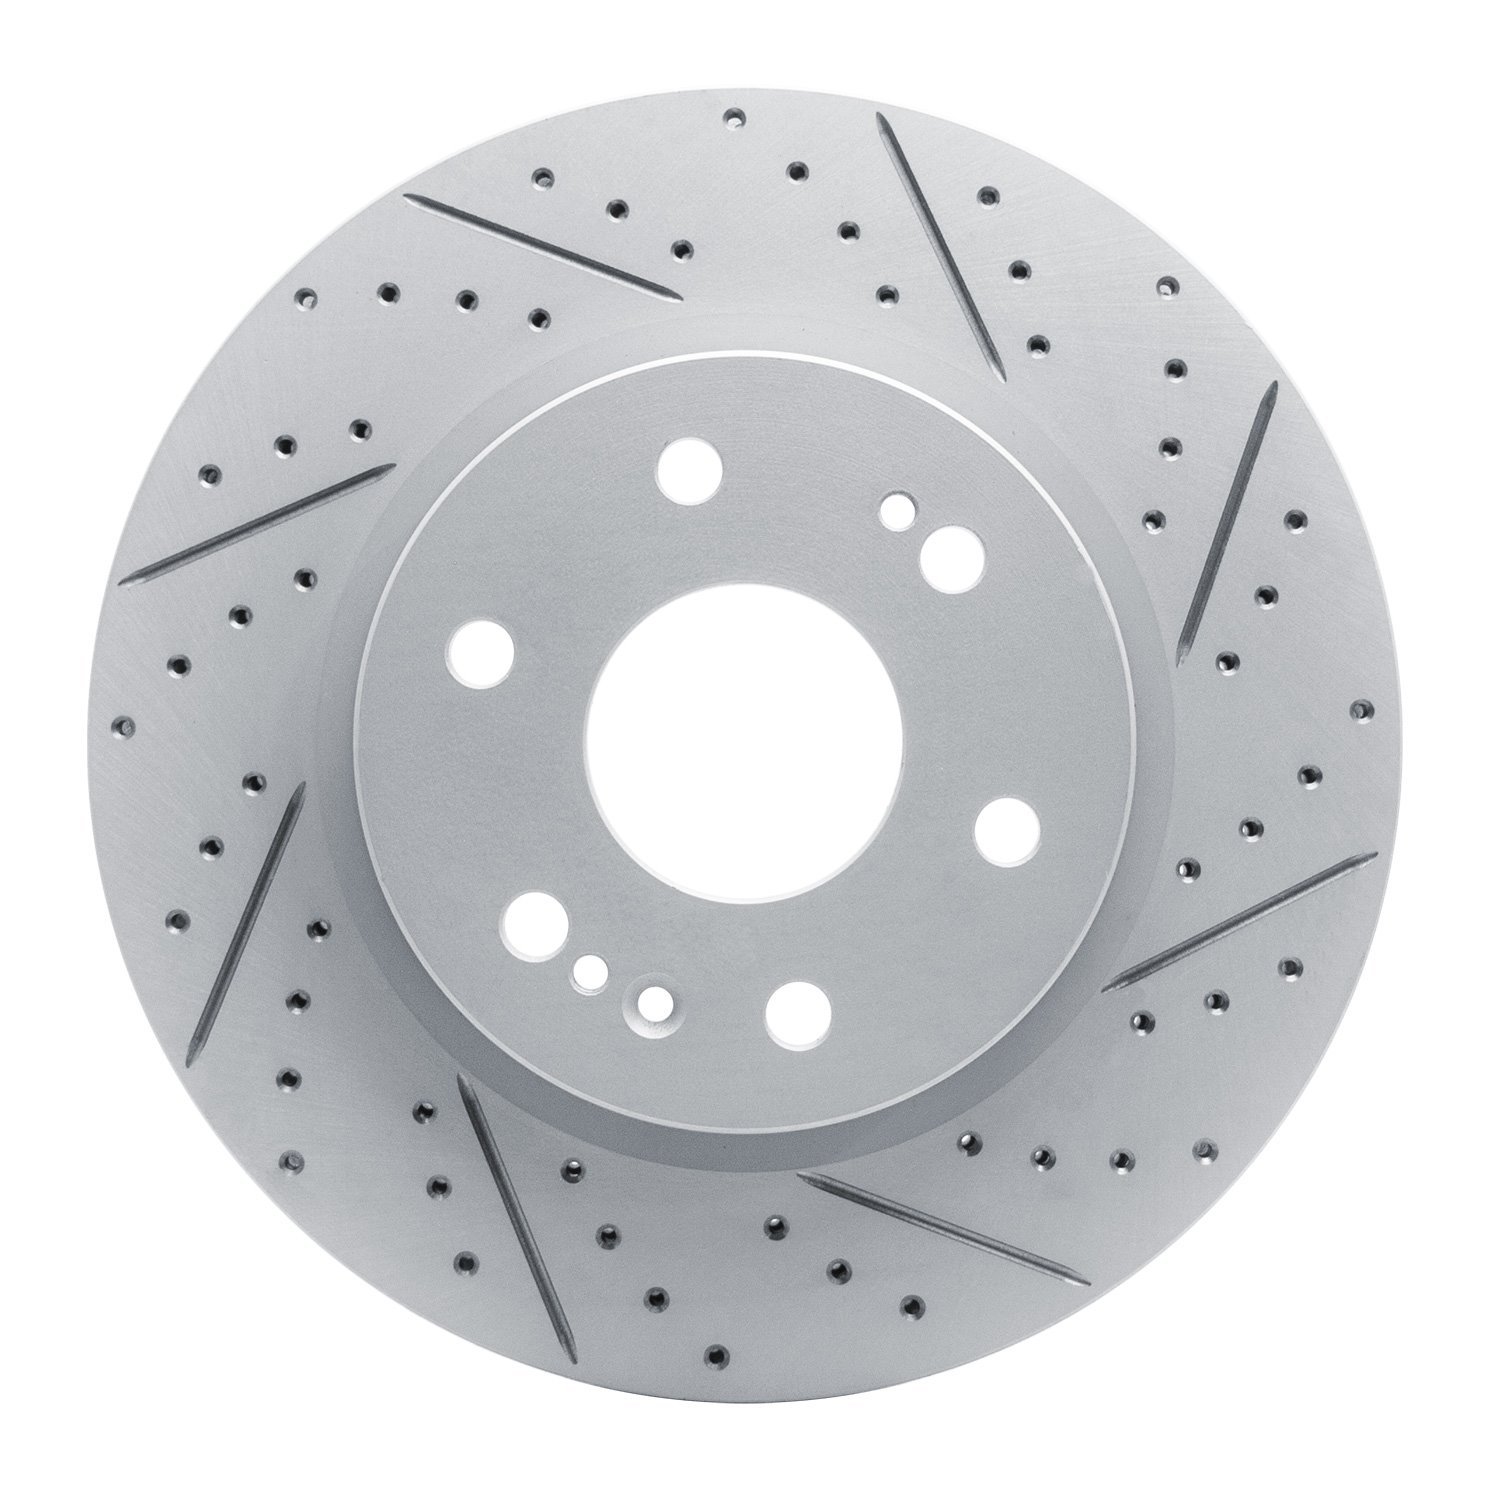 830-47080R Geoperformance Drilled/Slotted Brake Rotor, Fits Select GM, Position: Front Right